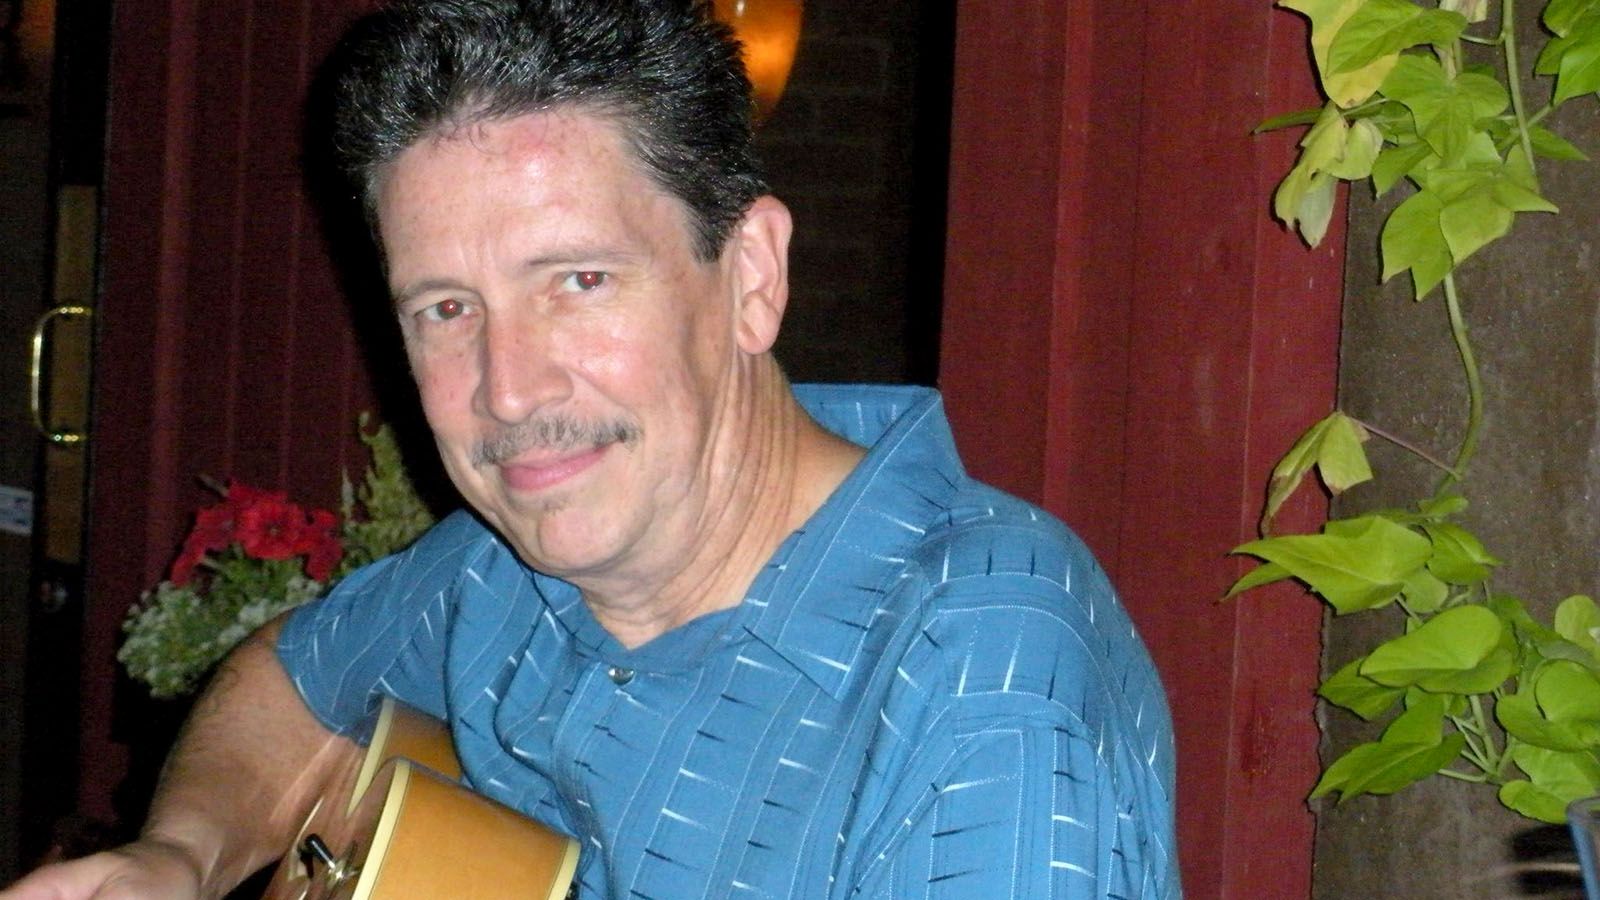 Local musicians will pay tribute to the late George Ogg on April 16 at Joseph Decuis Farm.